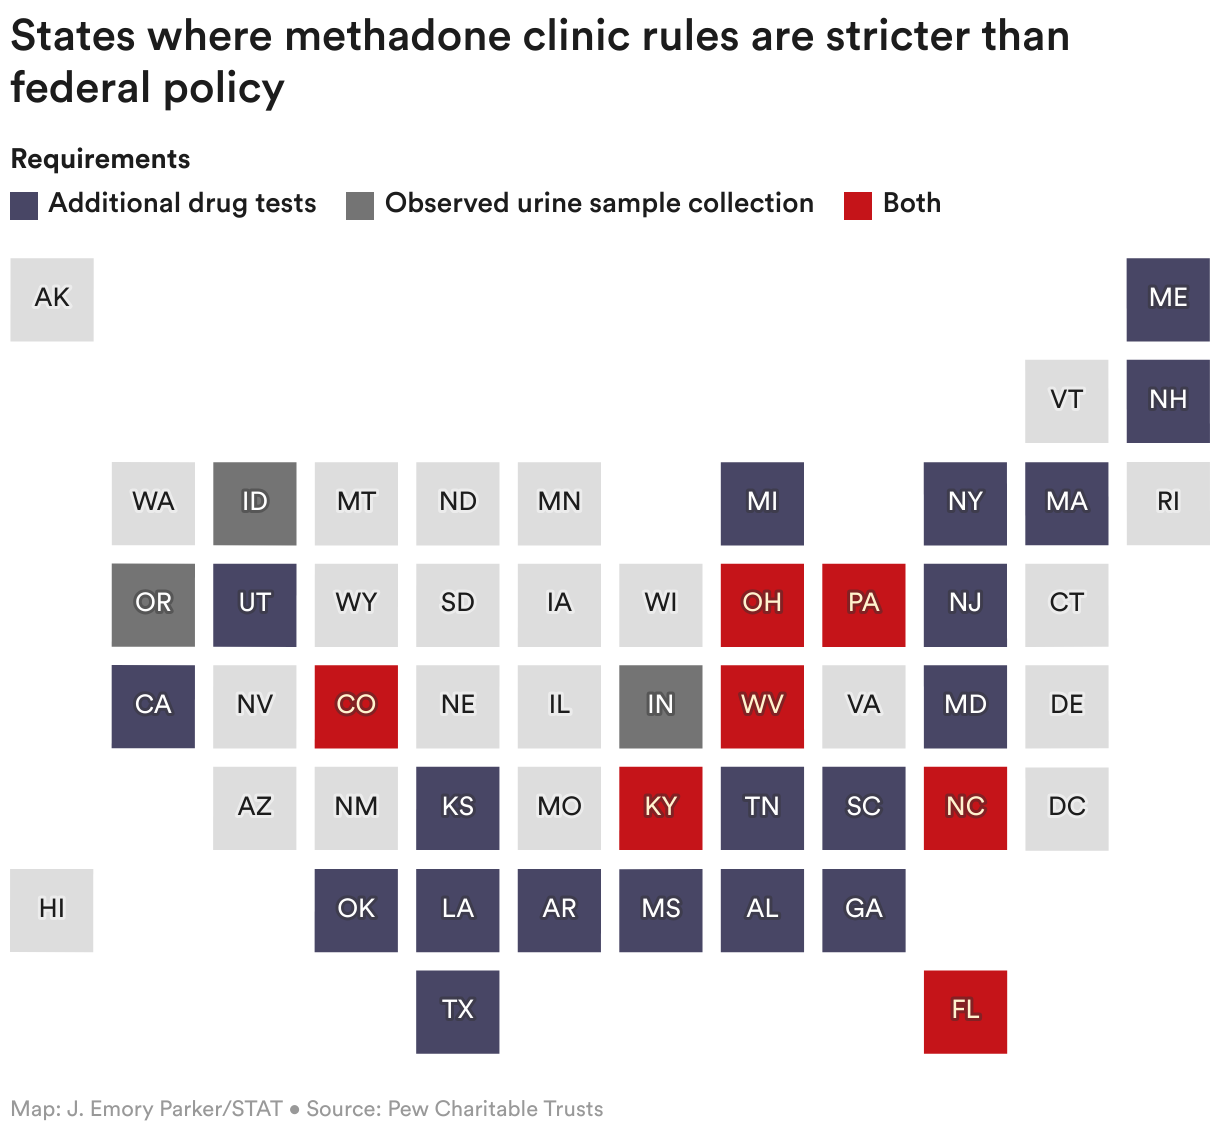 A map showing that 19 states require additional drug tests, 3 states require observed urine sample collection, and 7 states require both.